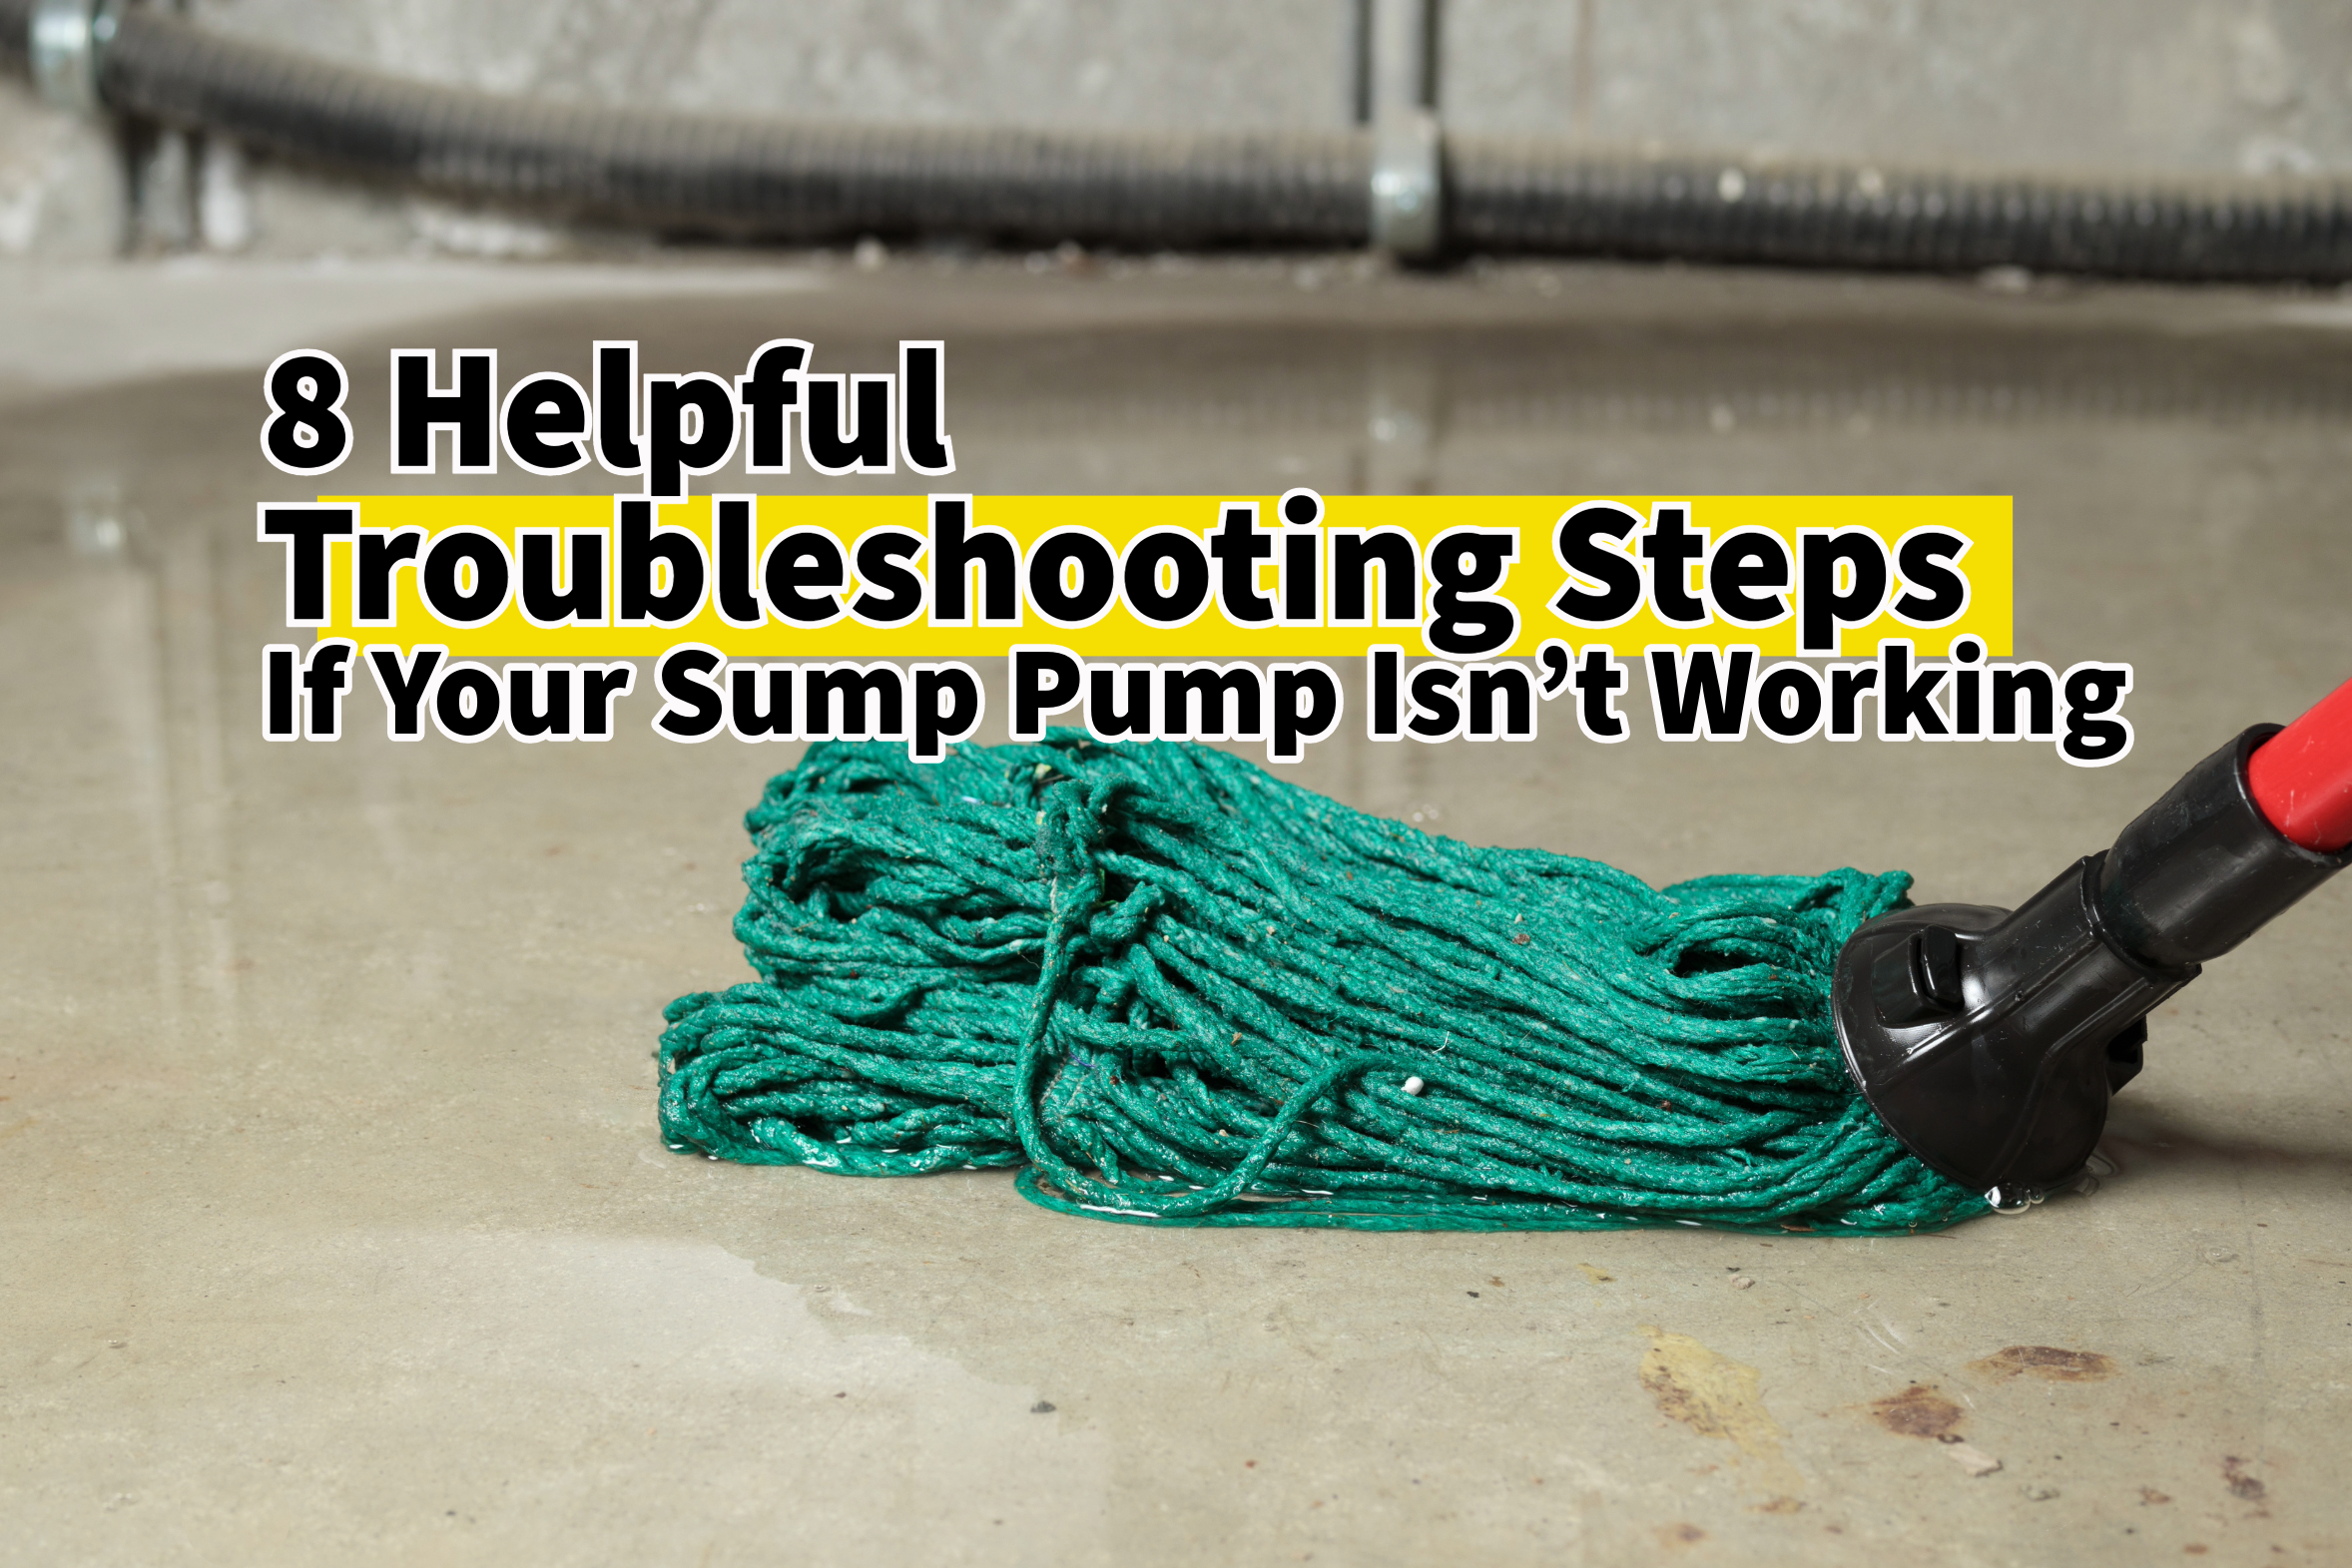 A homeowner’s guide to troubleshooting a malfunctioning sump pump. Plumbing and drain services in Dayton, Ohio.